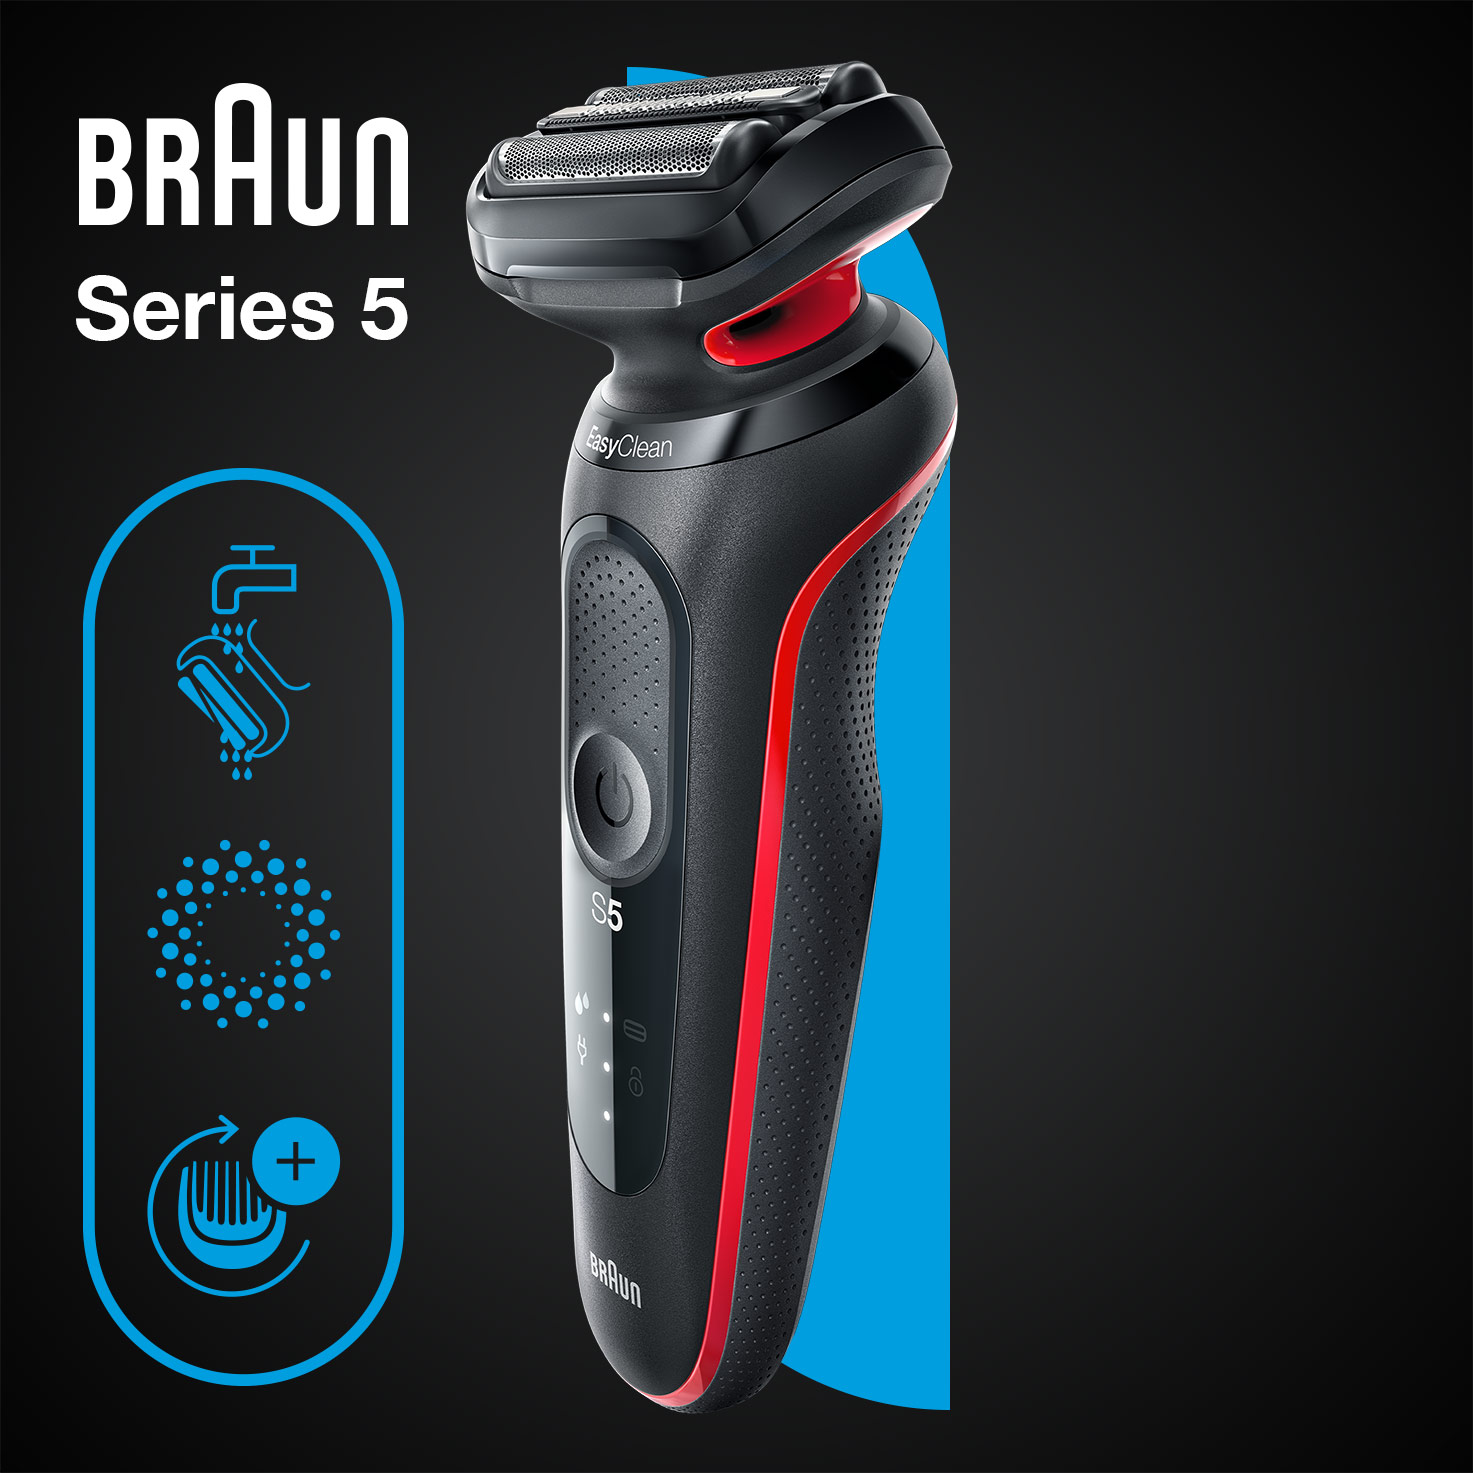 51-R1000s 5 Dry & shaver, Series Wet